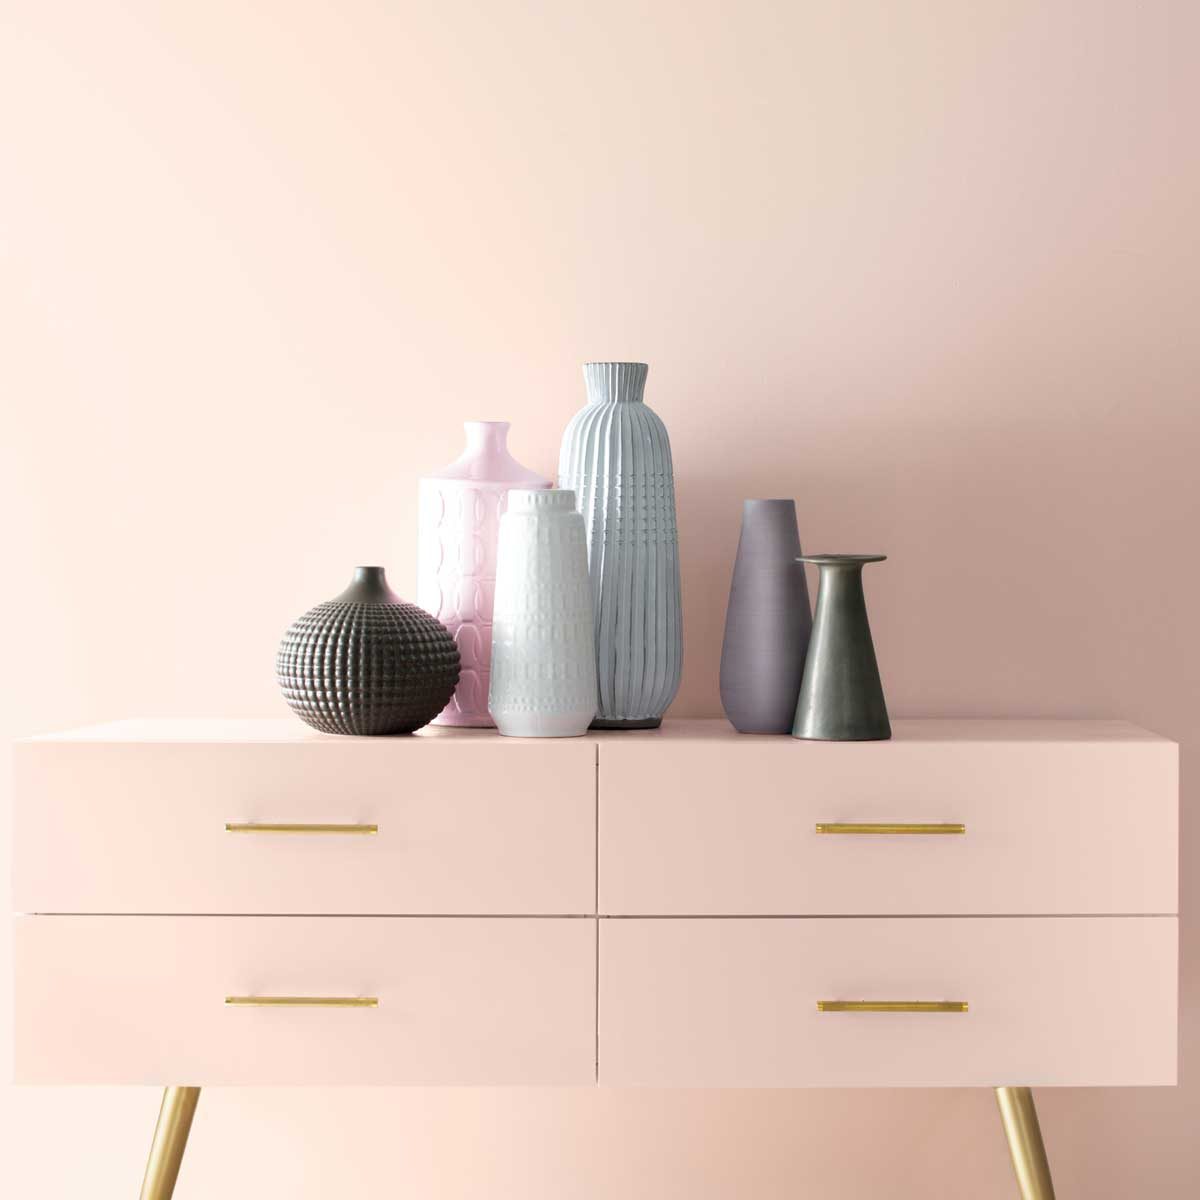 6 Paint Brands' Color of the Year for 2020